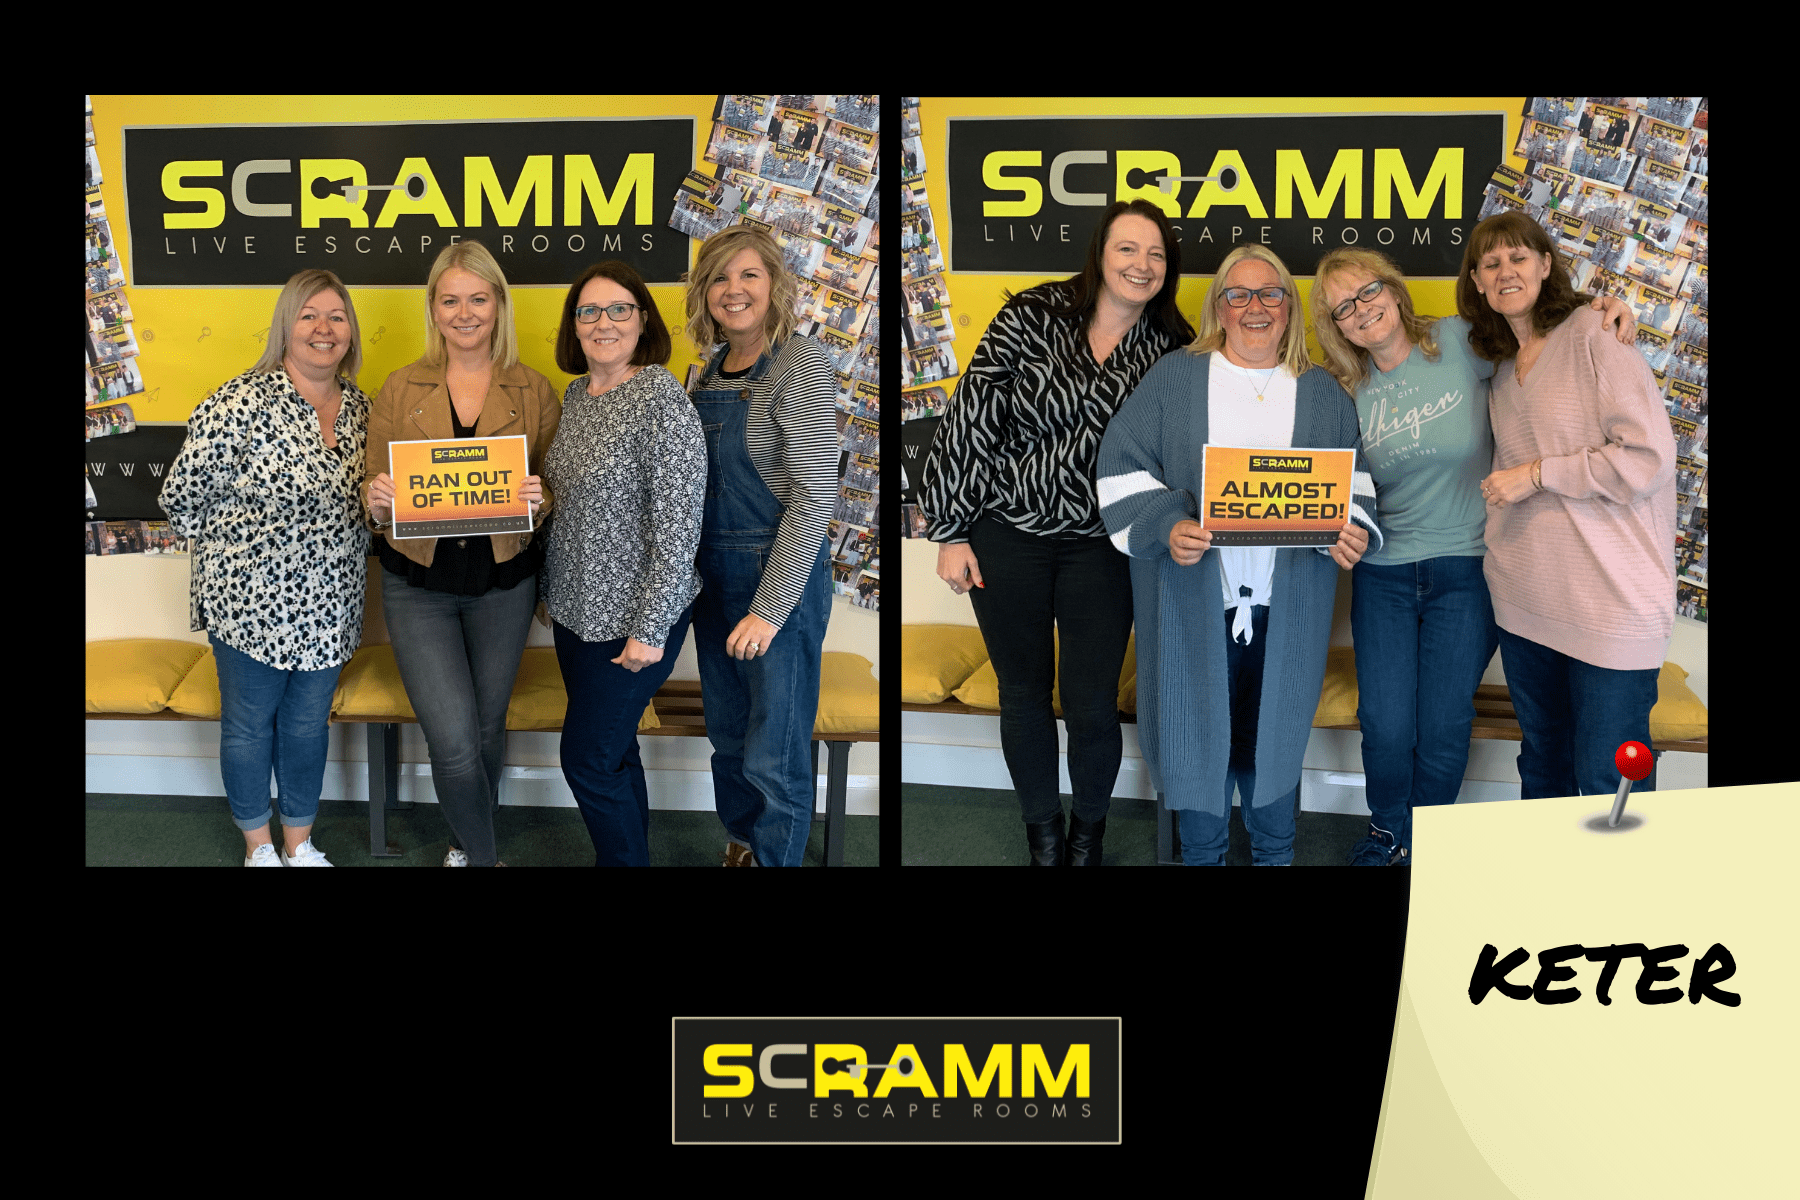 team-building-with-scramm-KETER 1